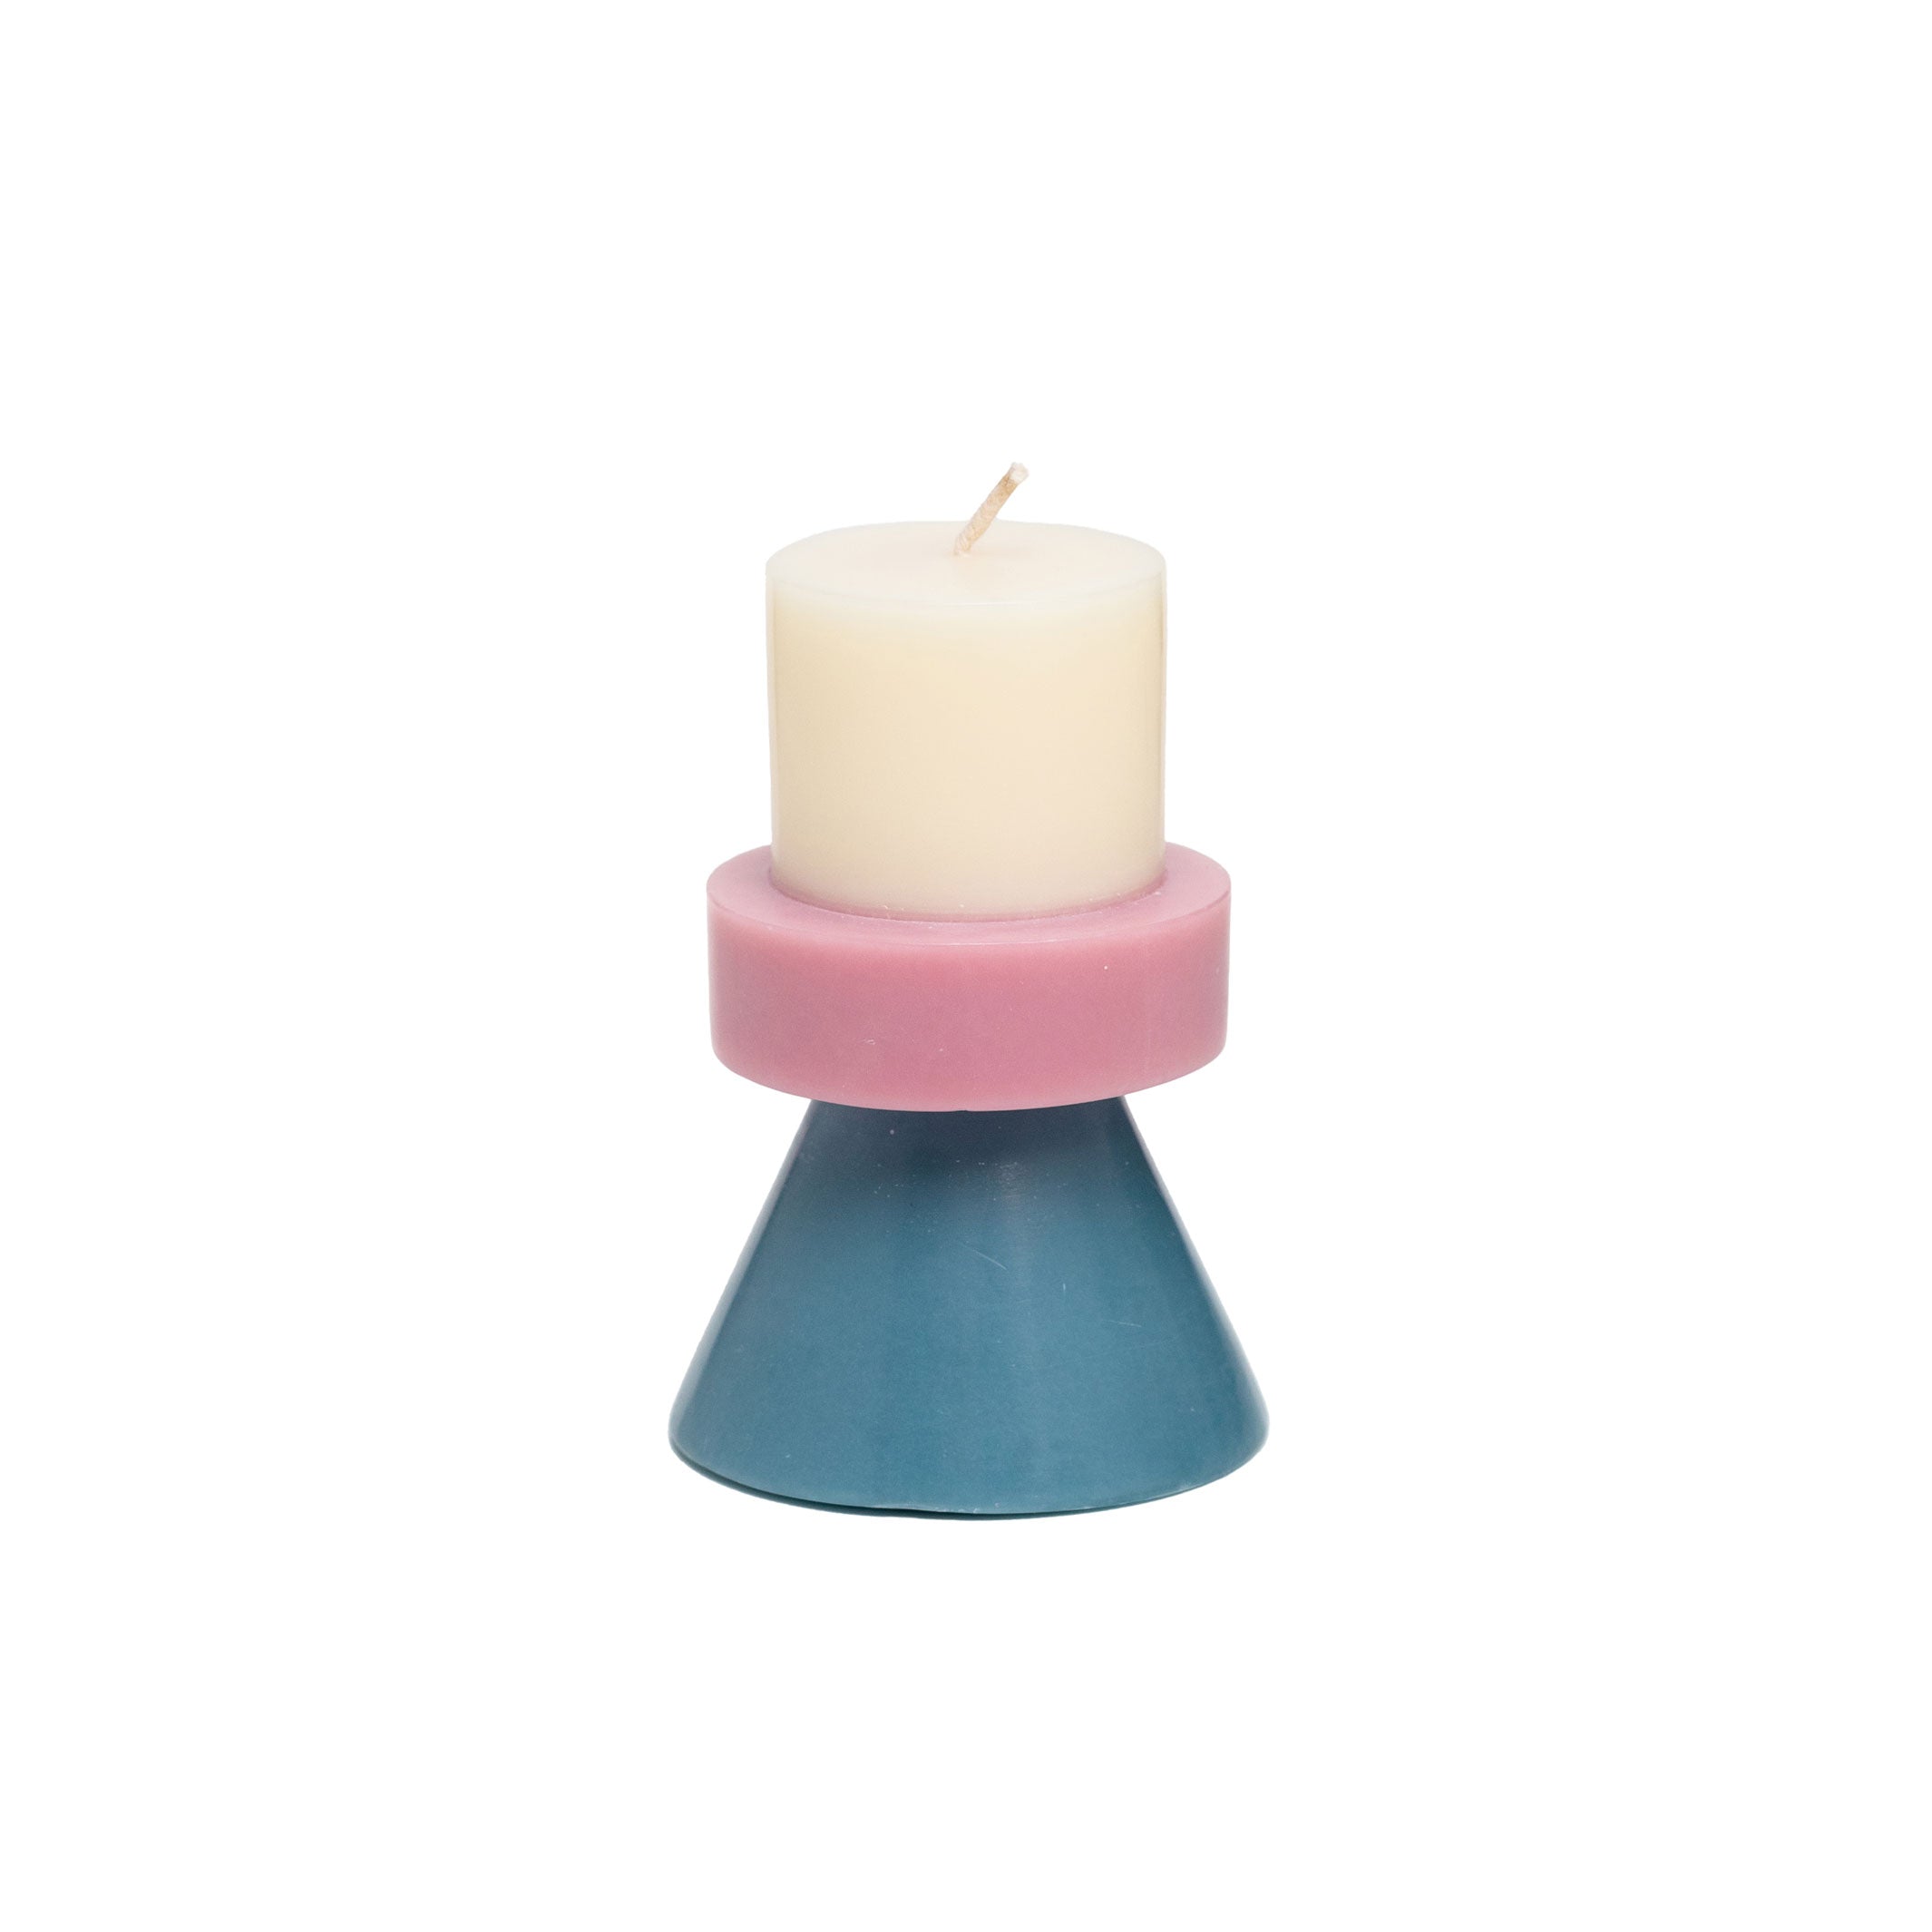 STACK CANDLE MINI | Colors ivory-lavender-bluegrey | 20 hrs. burning time | YOD AND CO